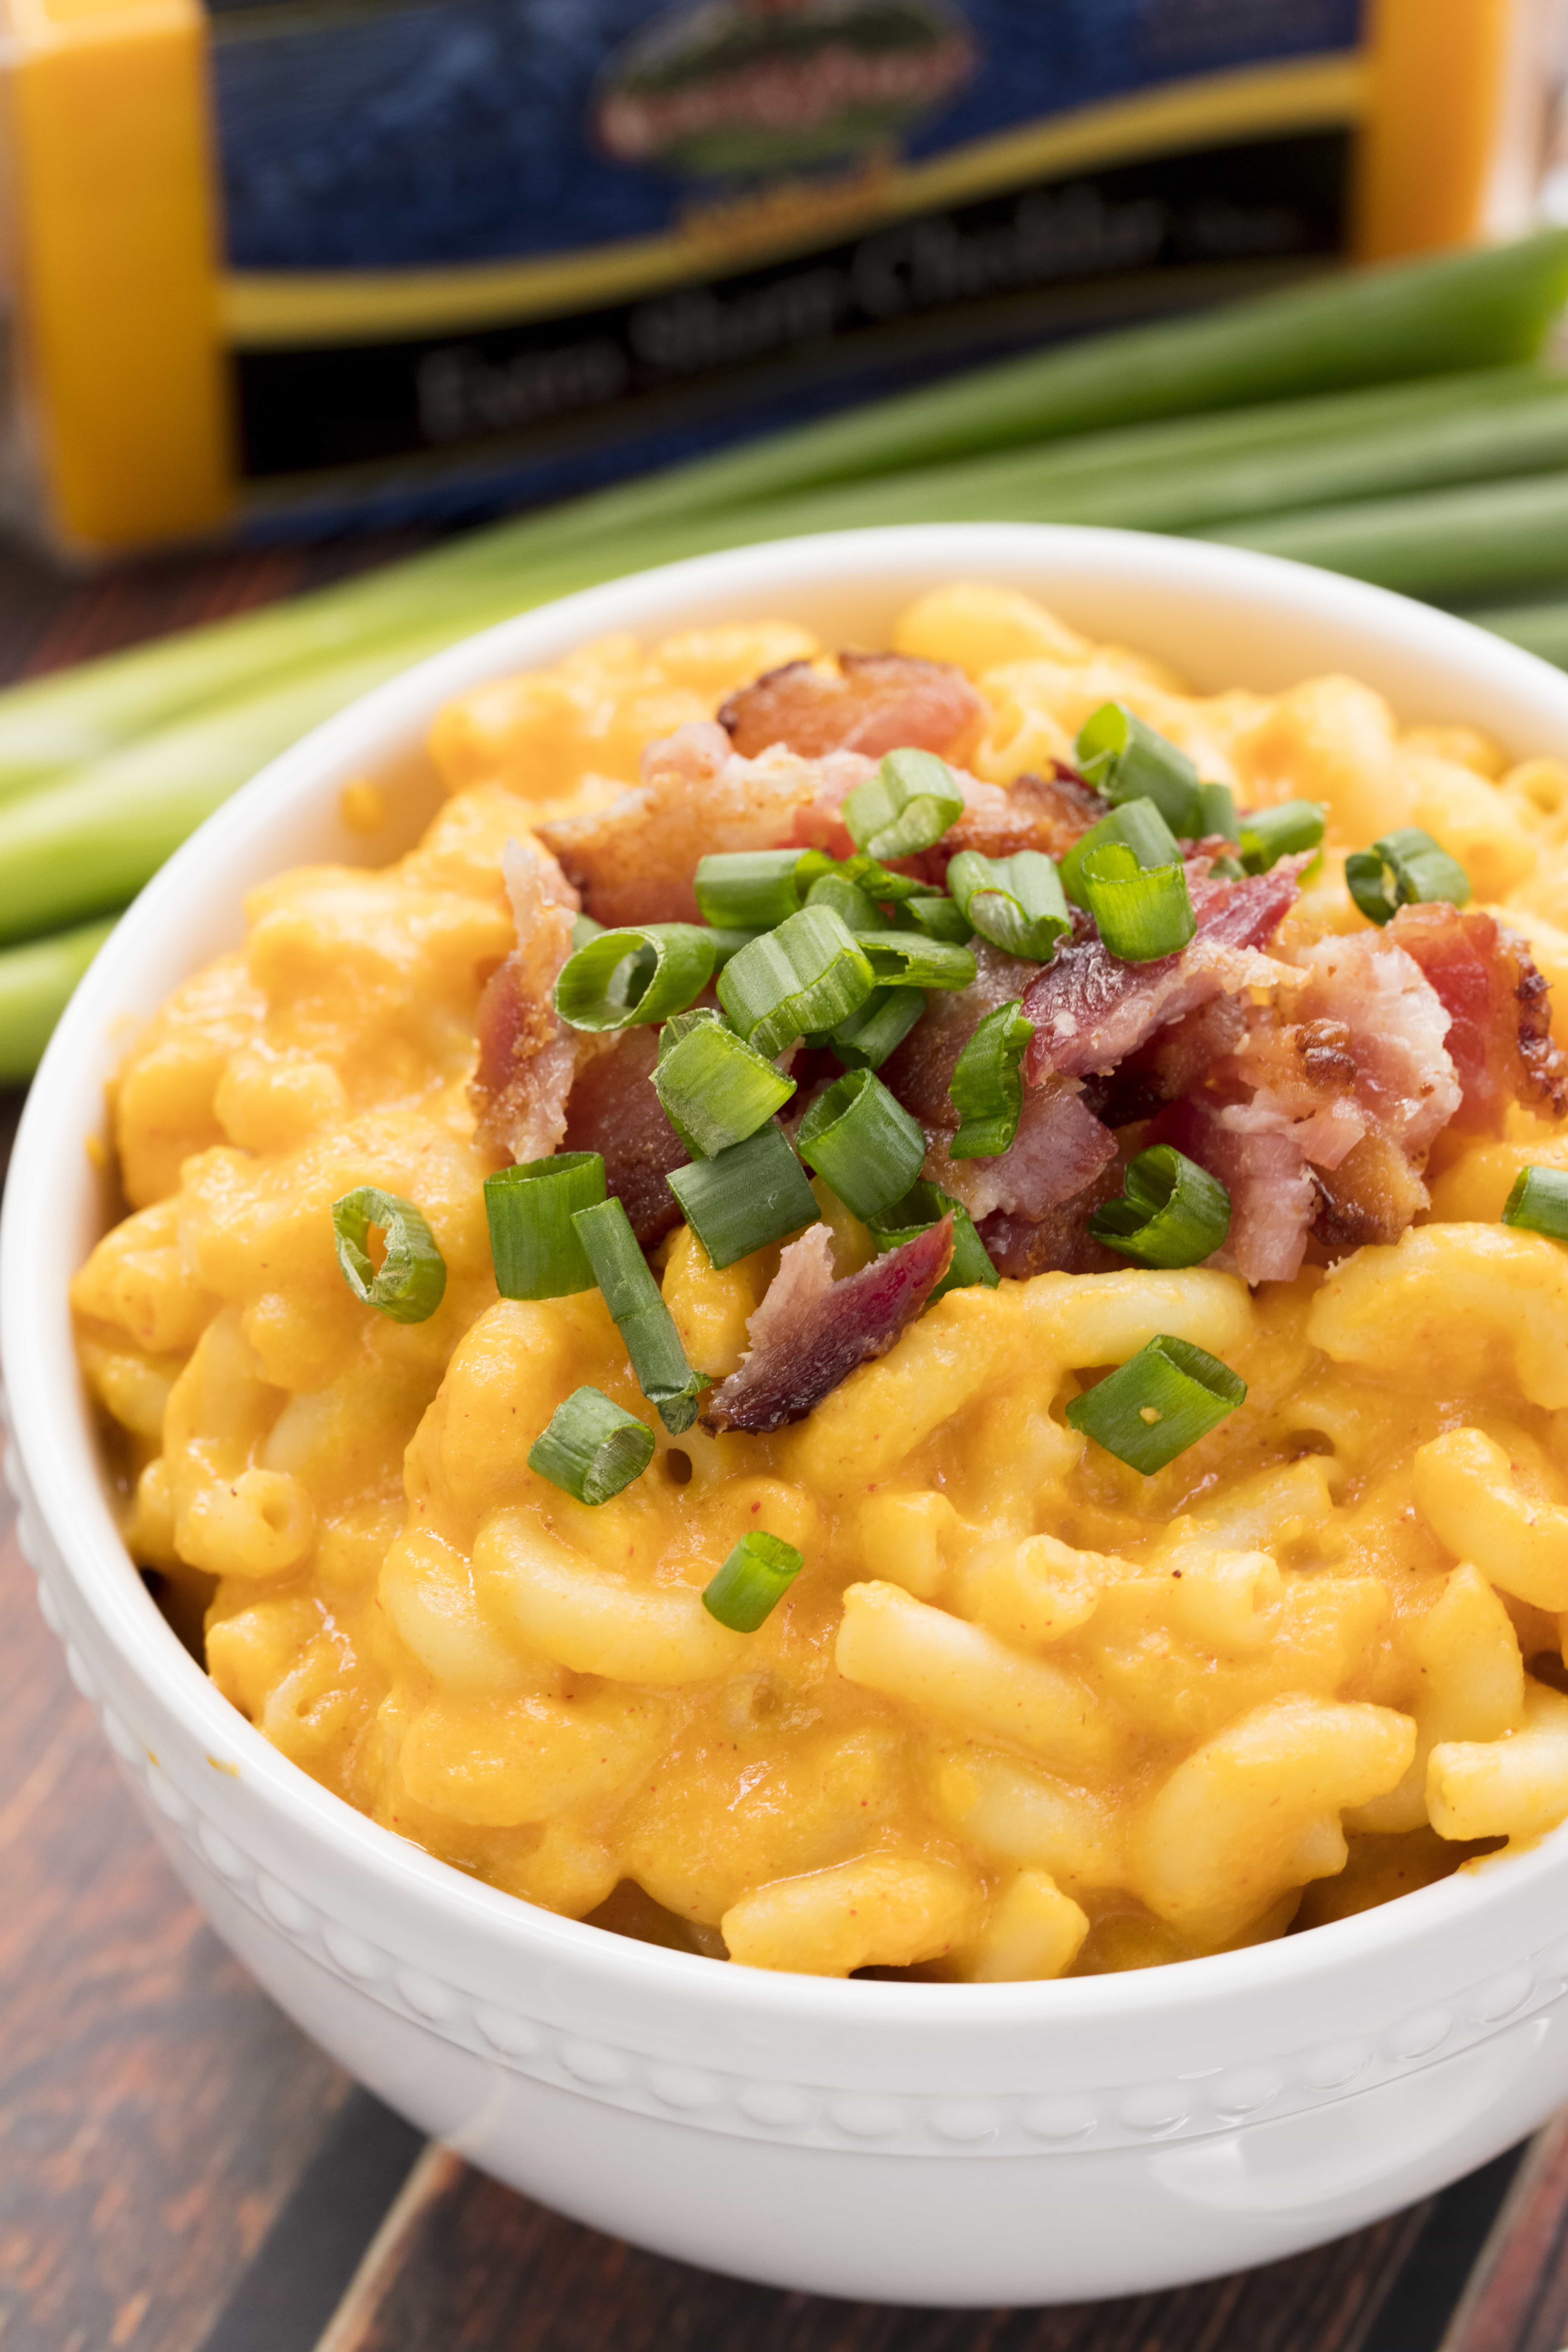 Sweet Potato Bacon Mac and Cheese will soon become your new family favorite! Sweet potatoes are the basis for this creamy sauce that's packed full of the most delicious sharp cheddar cheese.